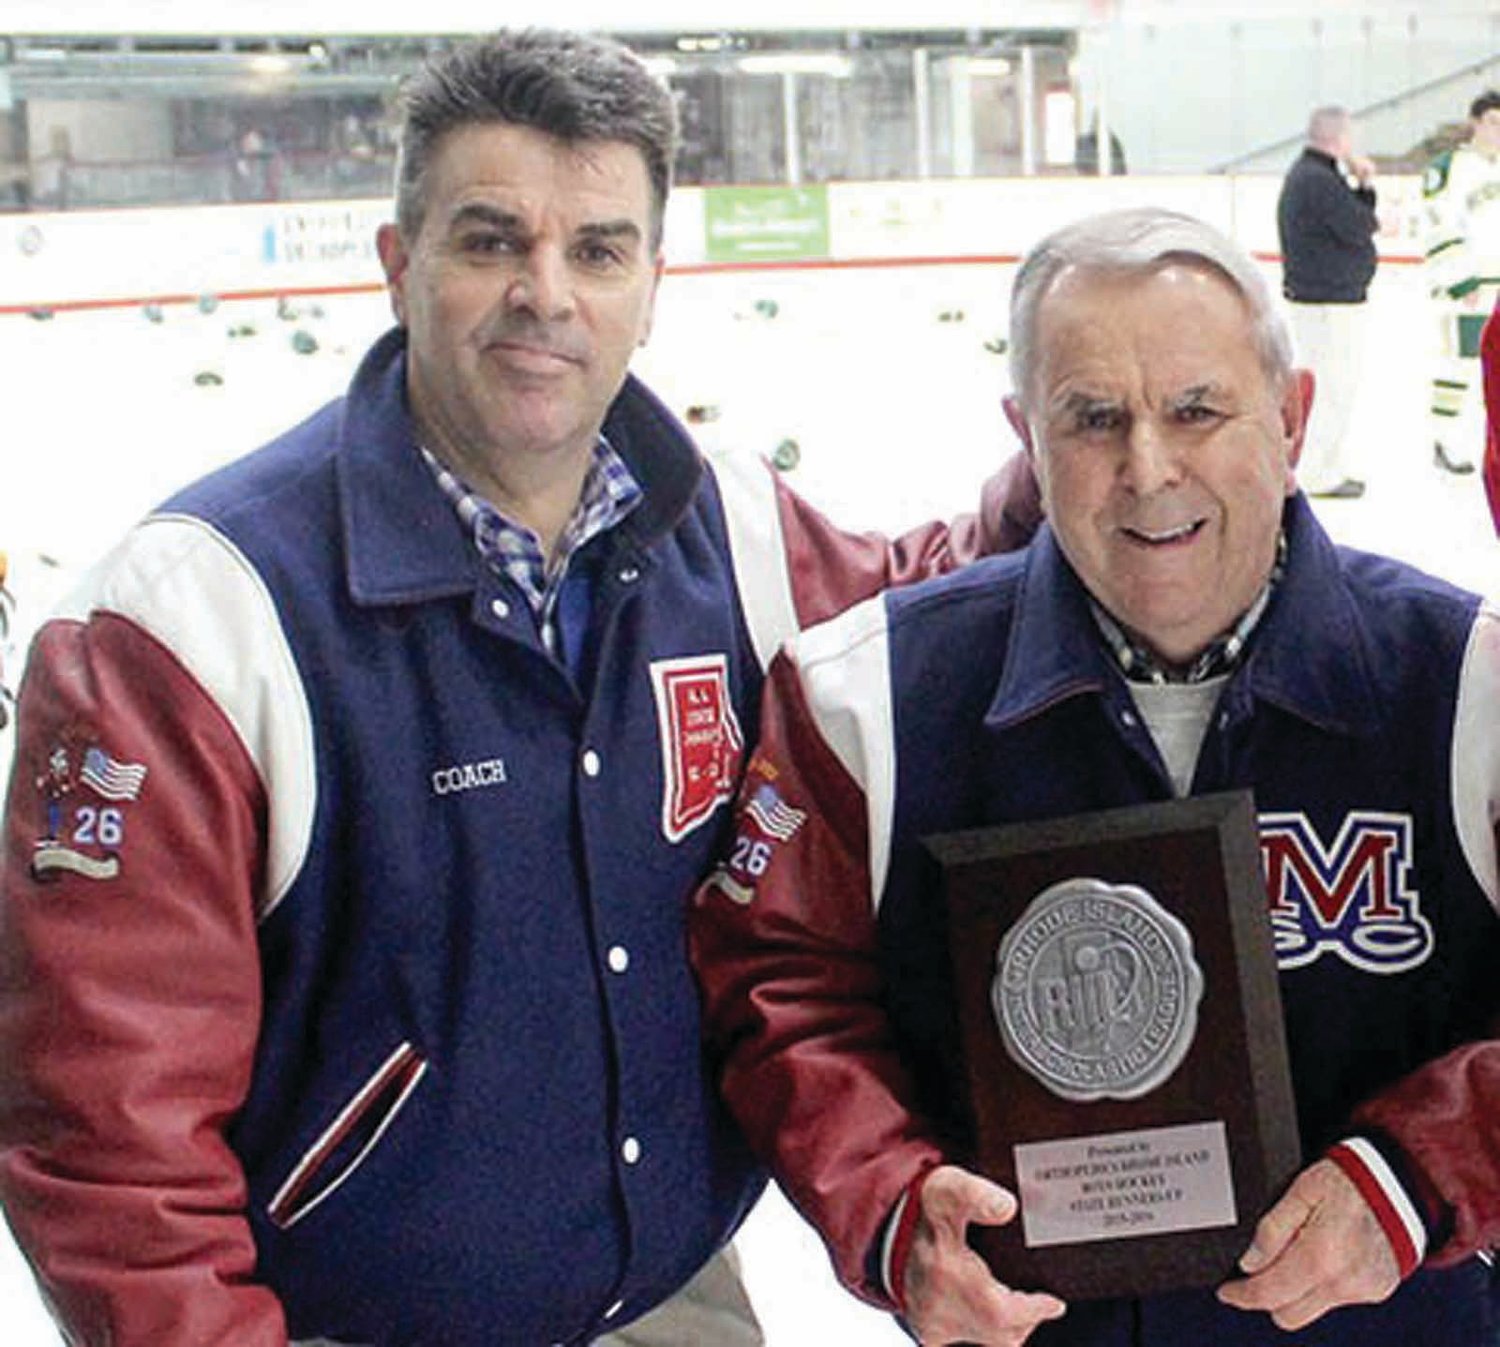 DYNAMIC DUO: Coaches Dave (left) and Bill Belisle receiving a plaque from the RIIL.